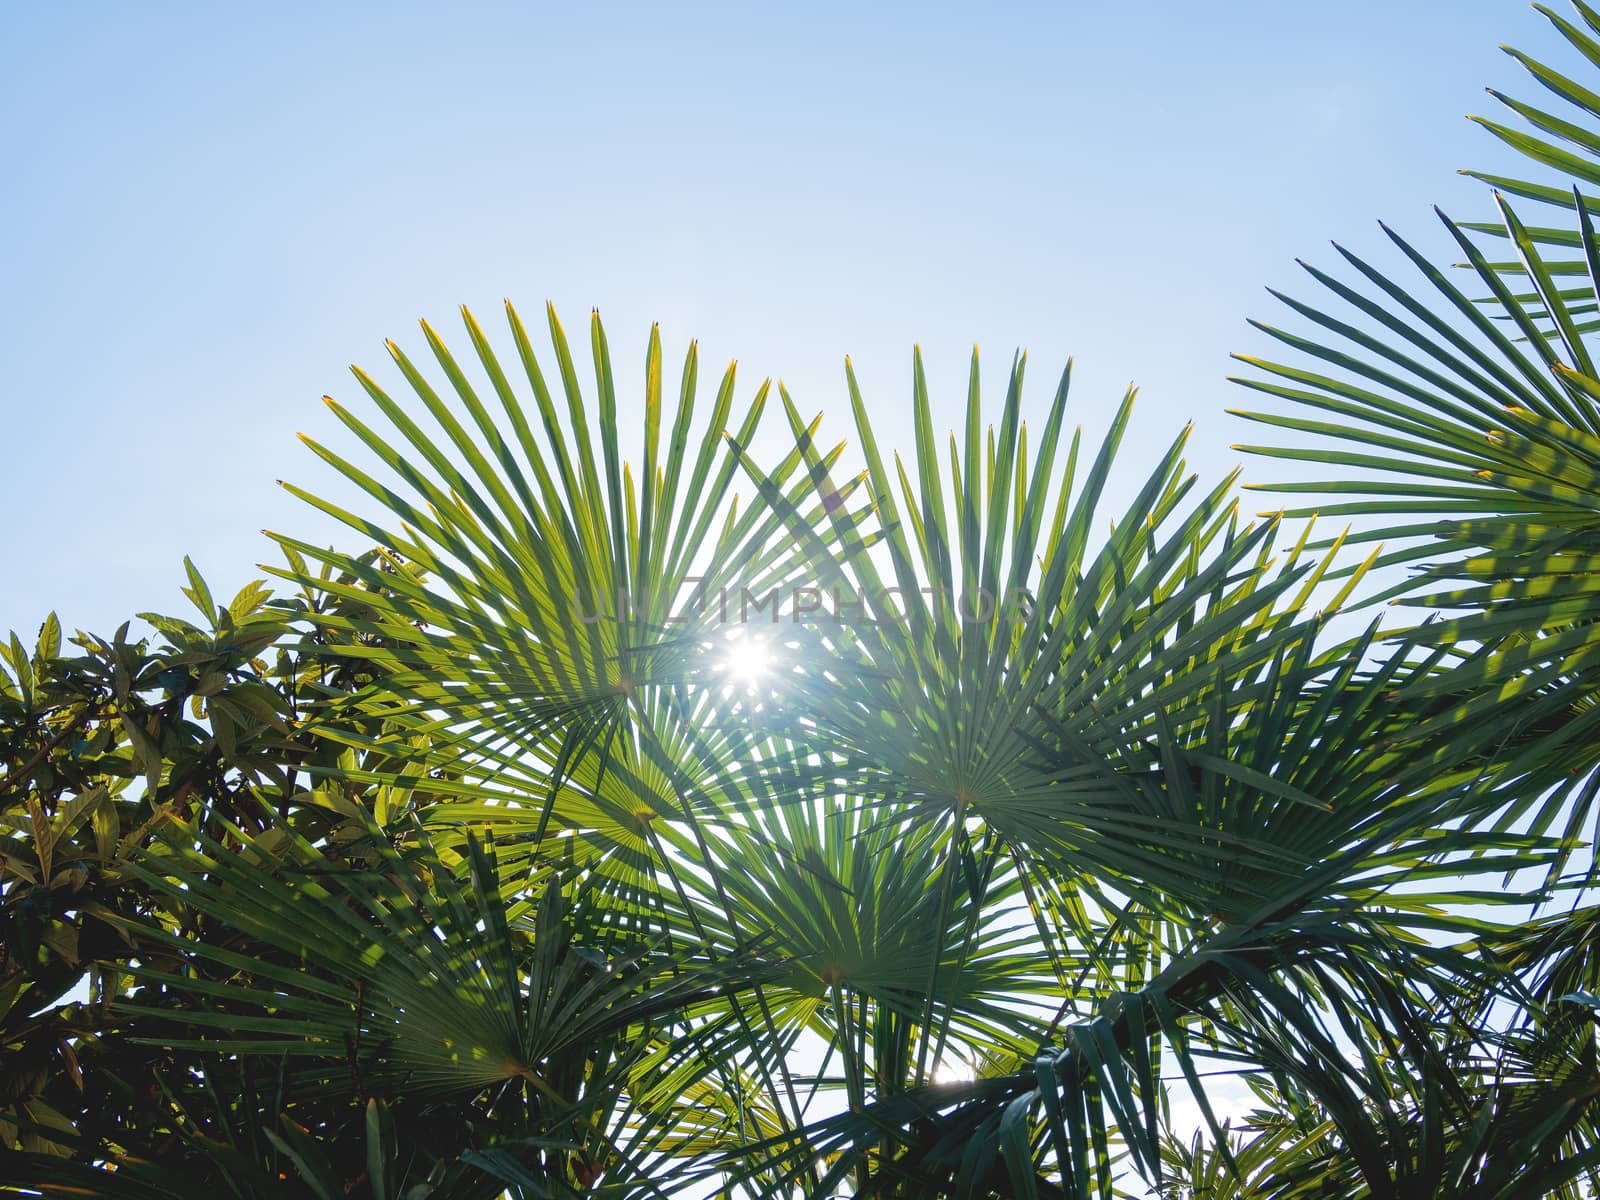 Sun shines on palm tree leaves. Tropical trees with fresh green foliage. by aksenovko